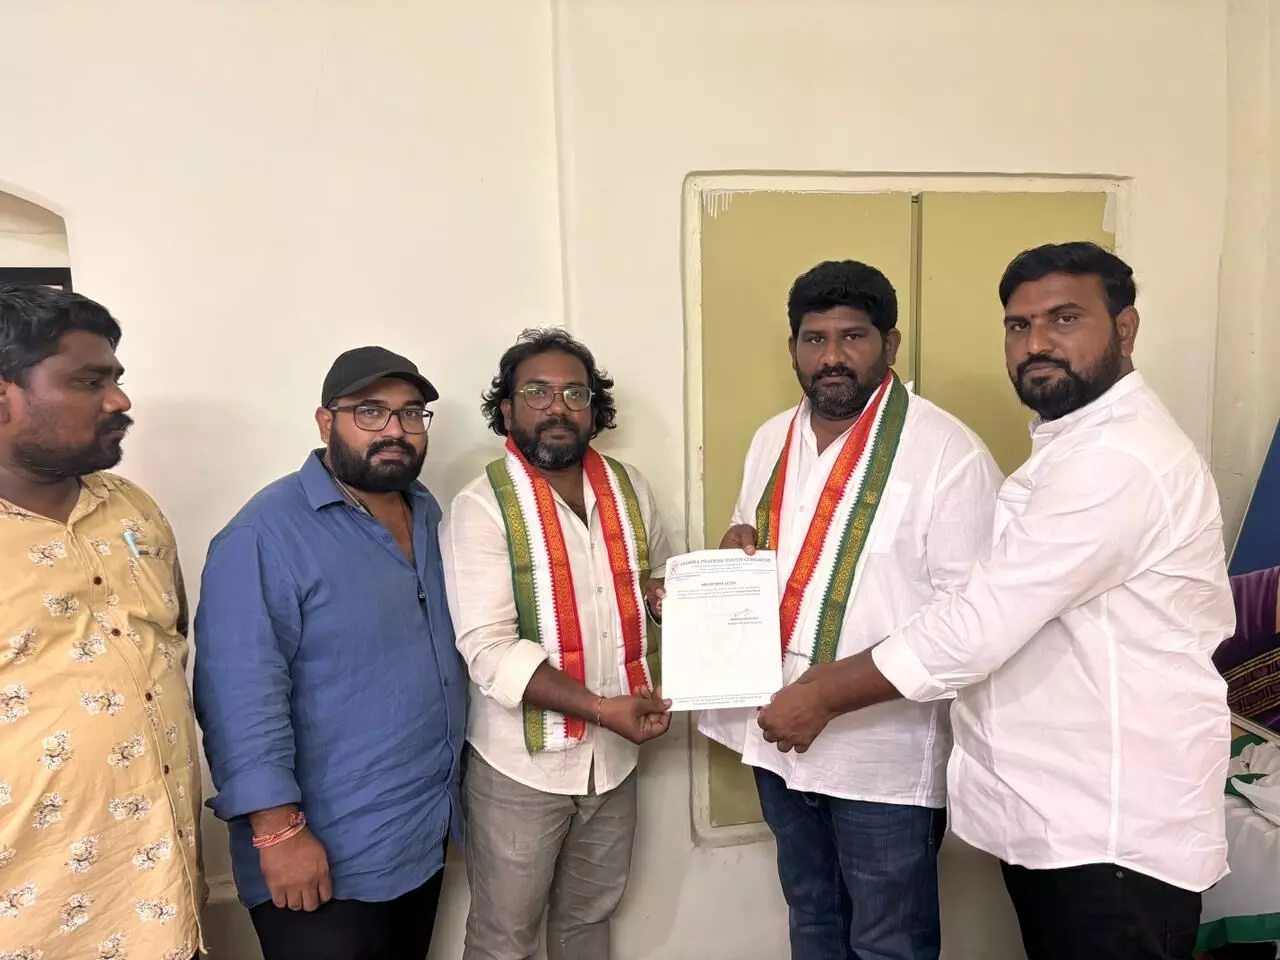 PCC Delegate Satish Rayala Appointed as State Youth Congress Spokesperson